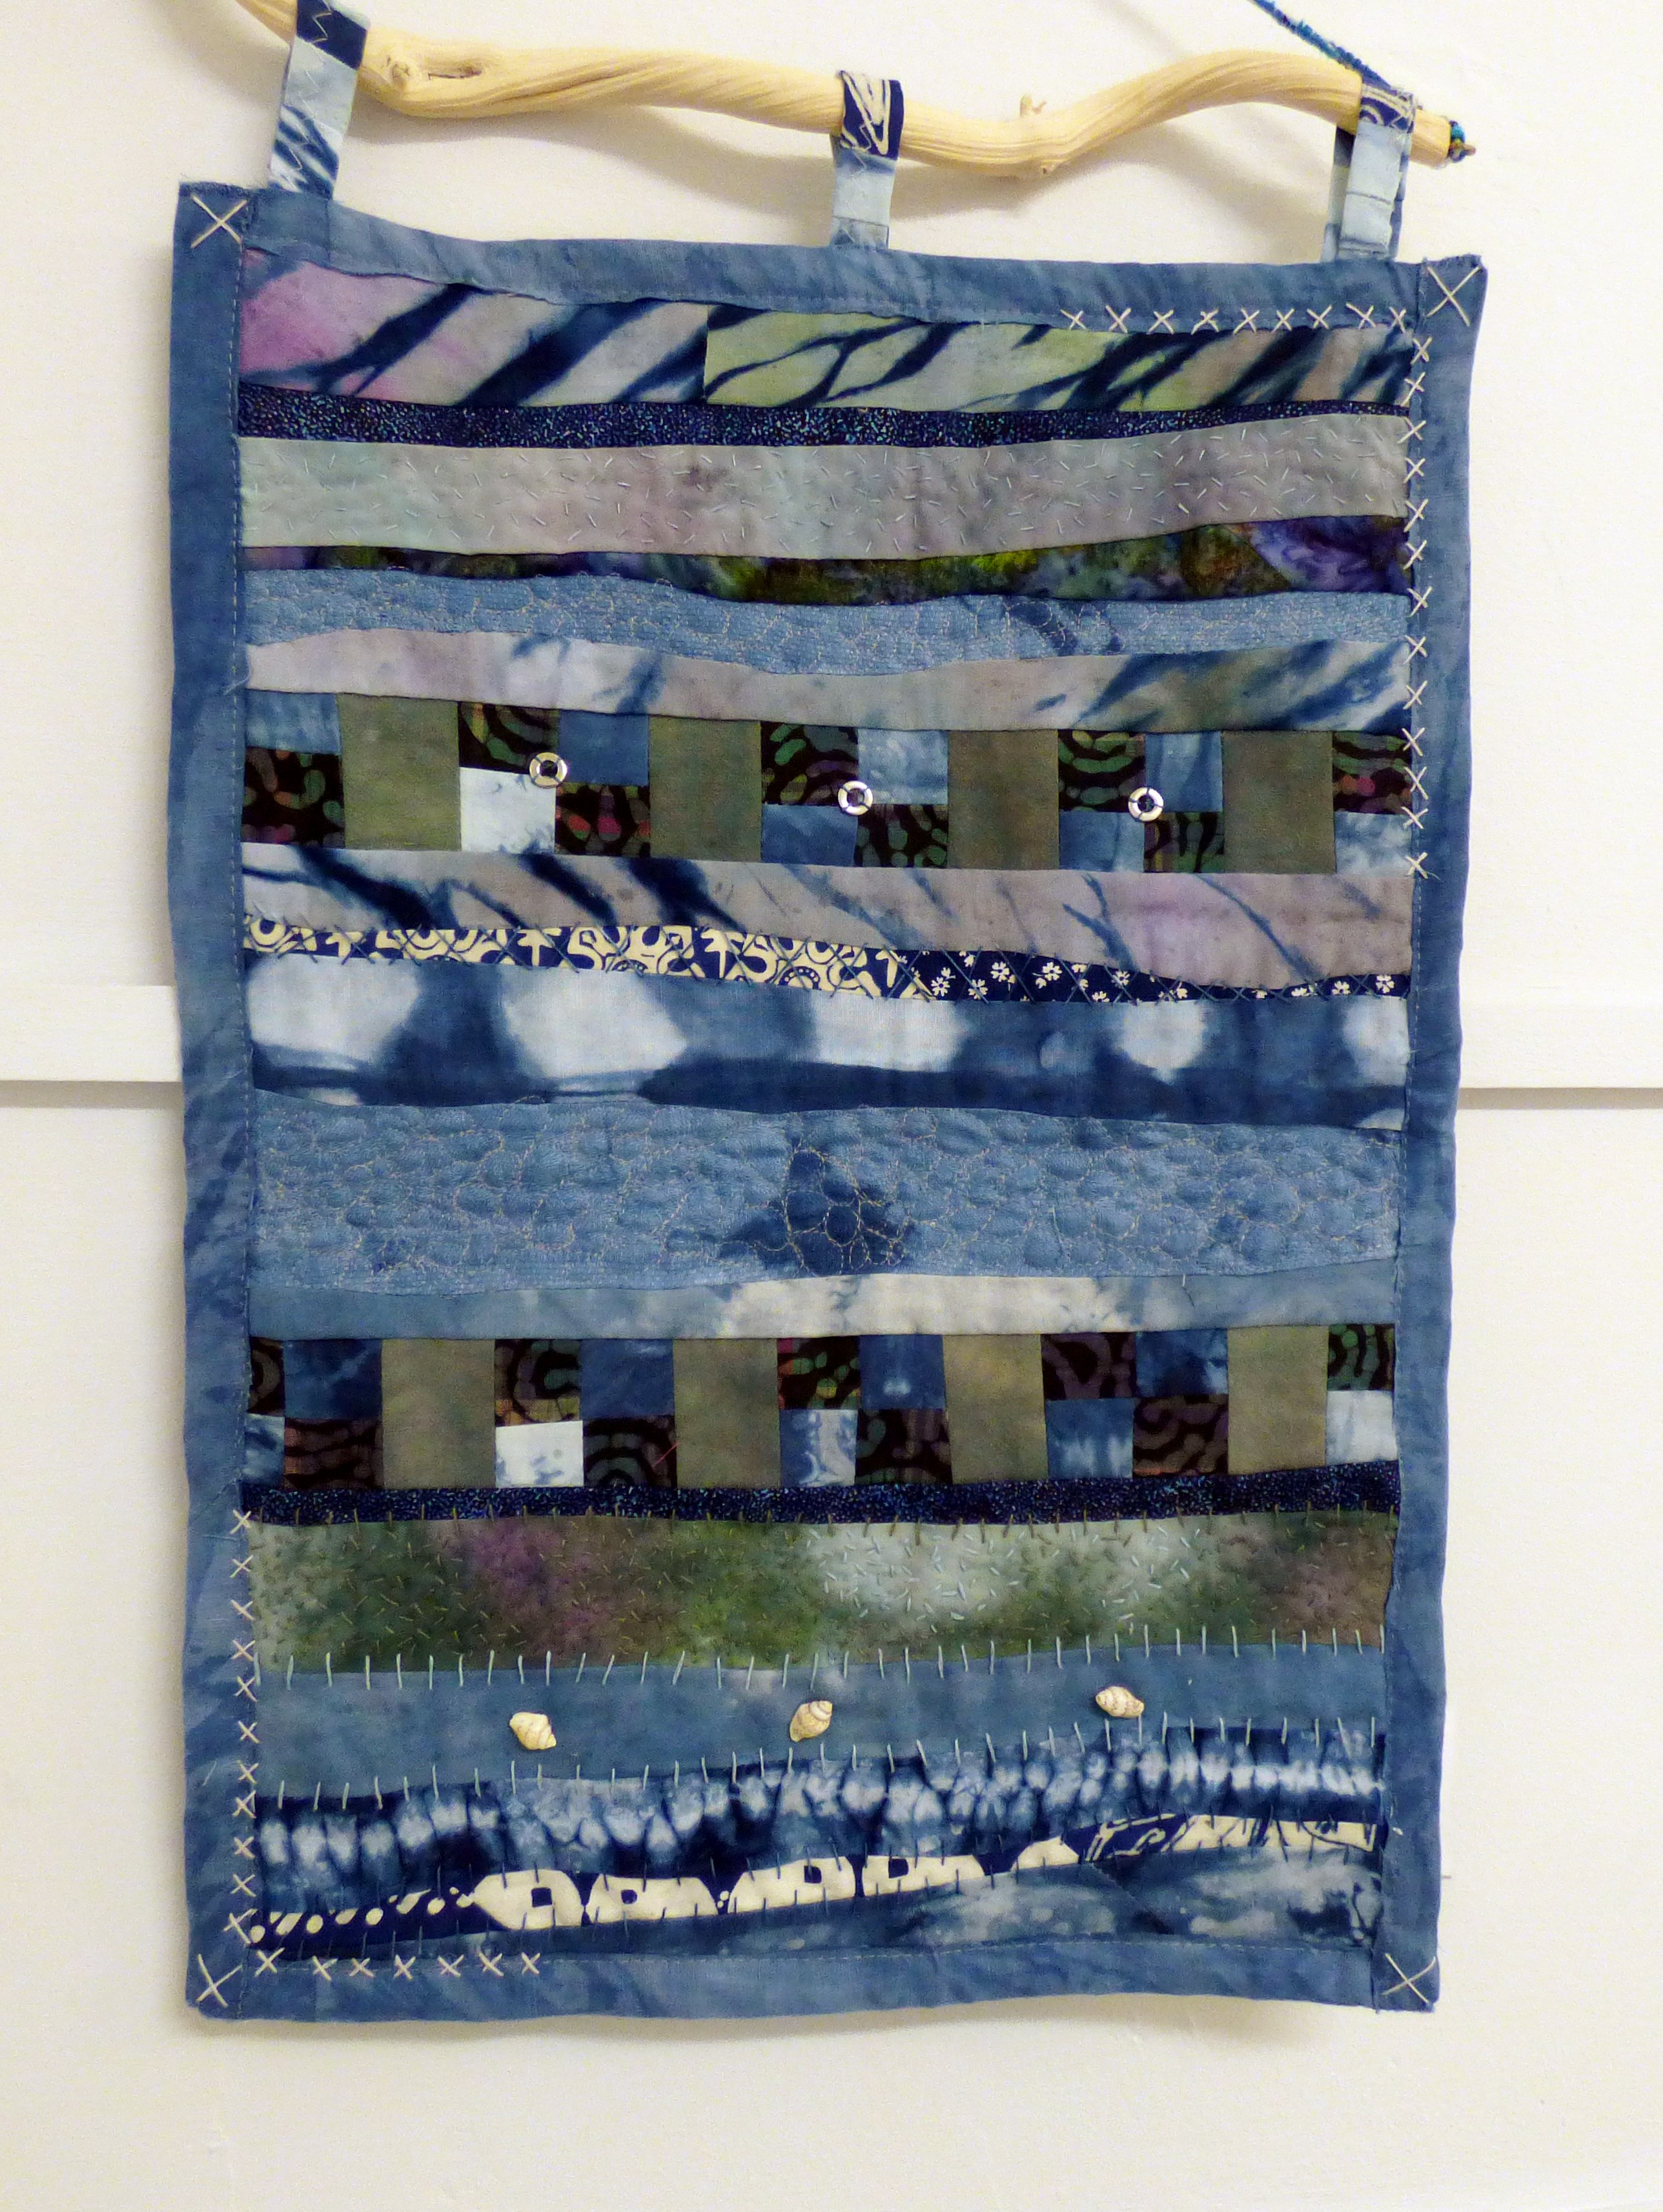 SHADES OF H2O 1 by Sue Gilchrist, hand dyed fabric collage, ConText group 2018